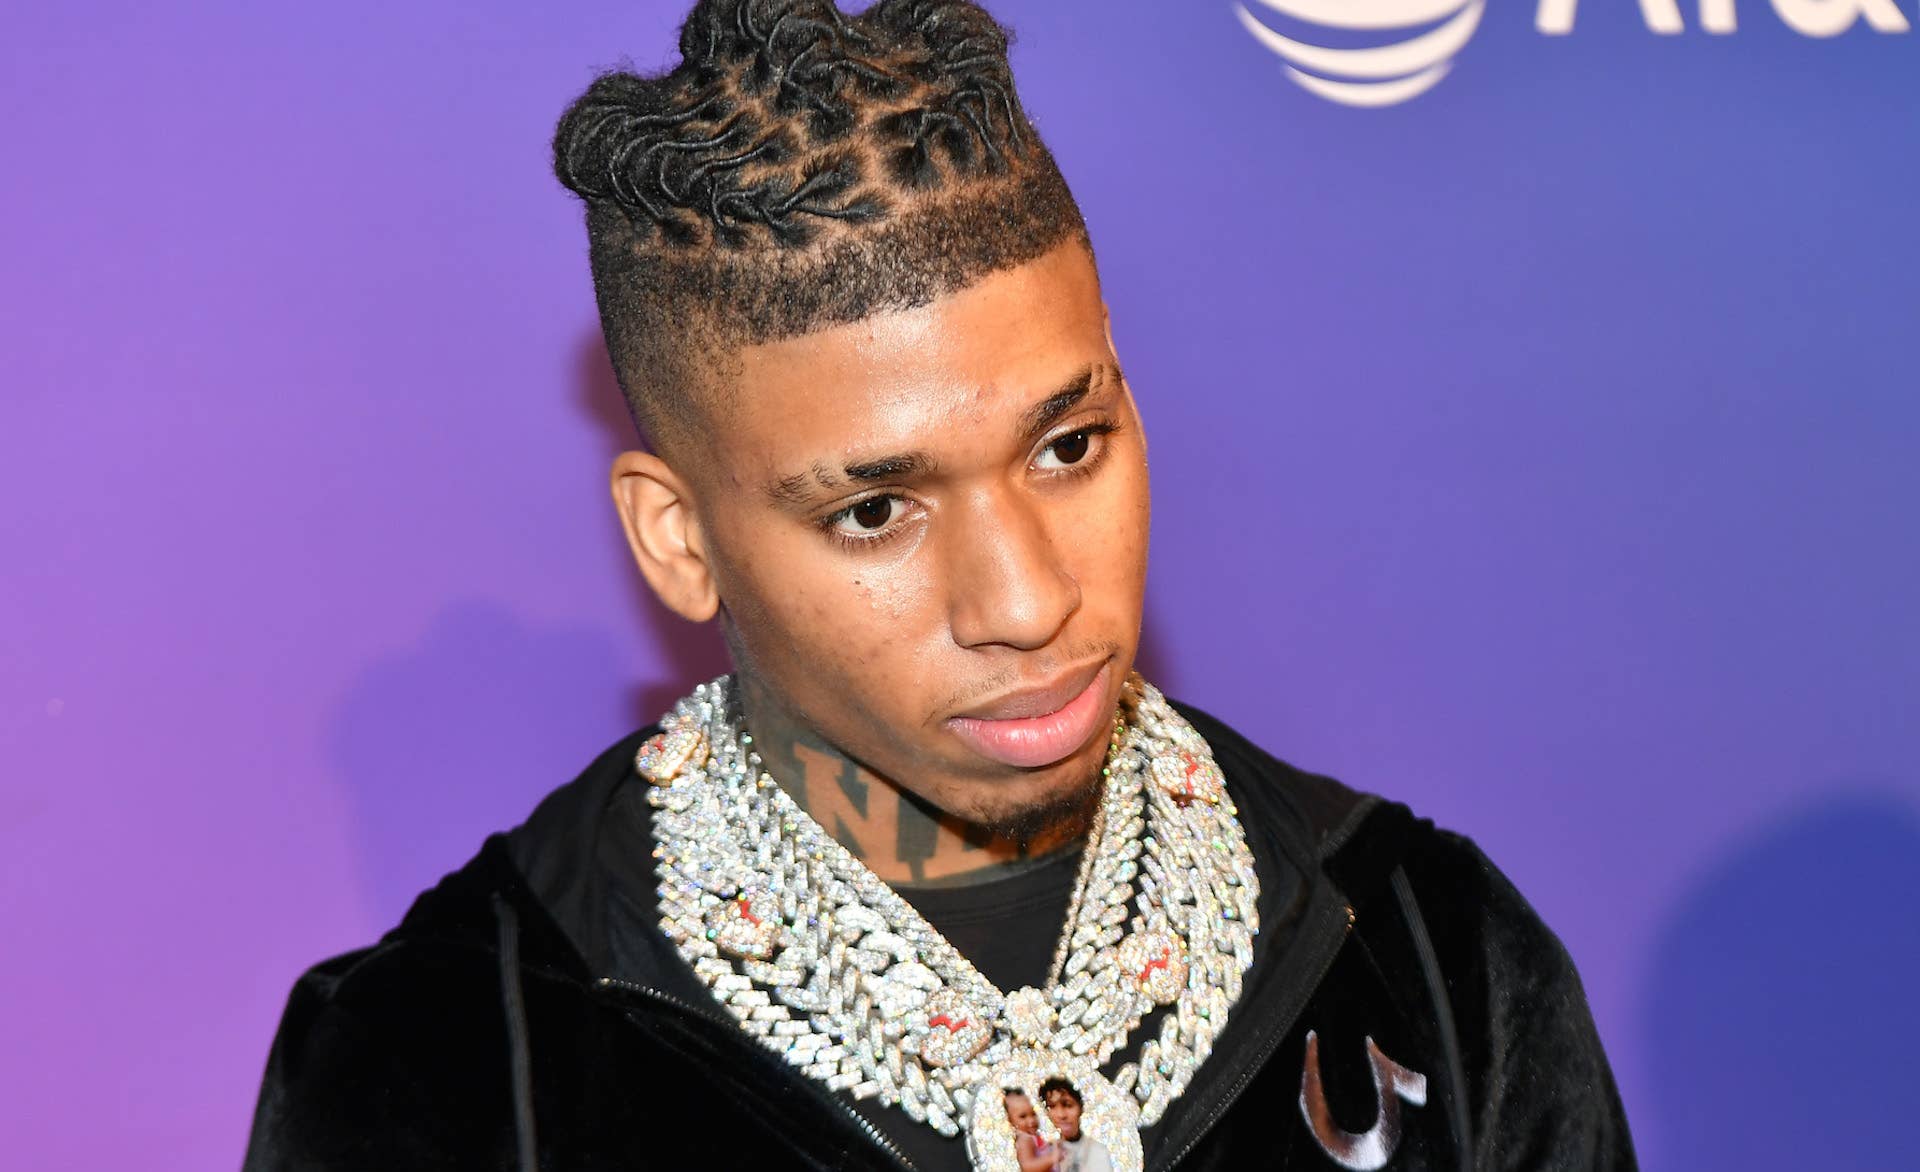 NLE Choppa Challenges Blueface To A Boxing Match After Continued Disrespect